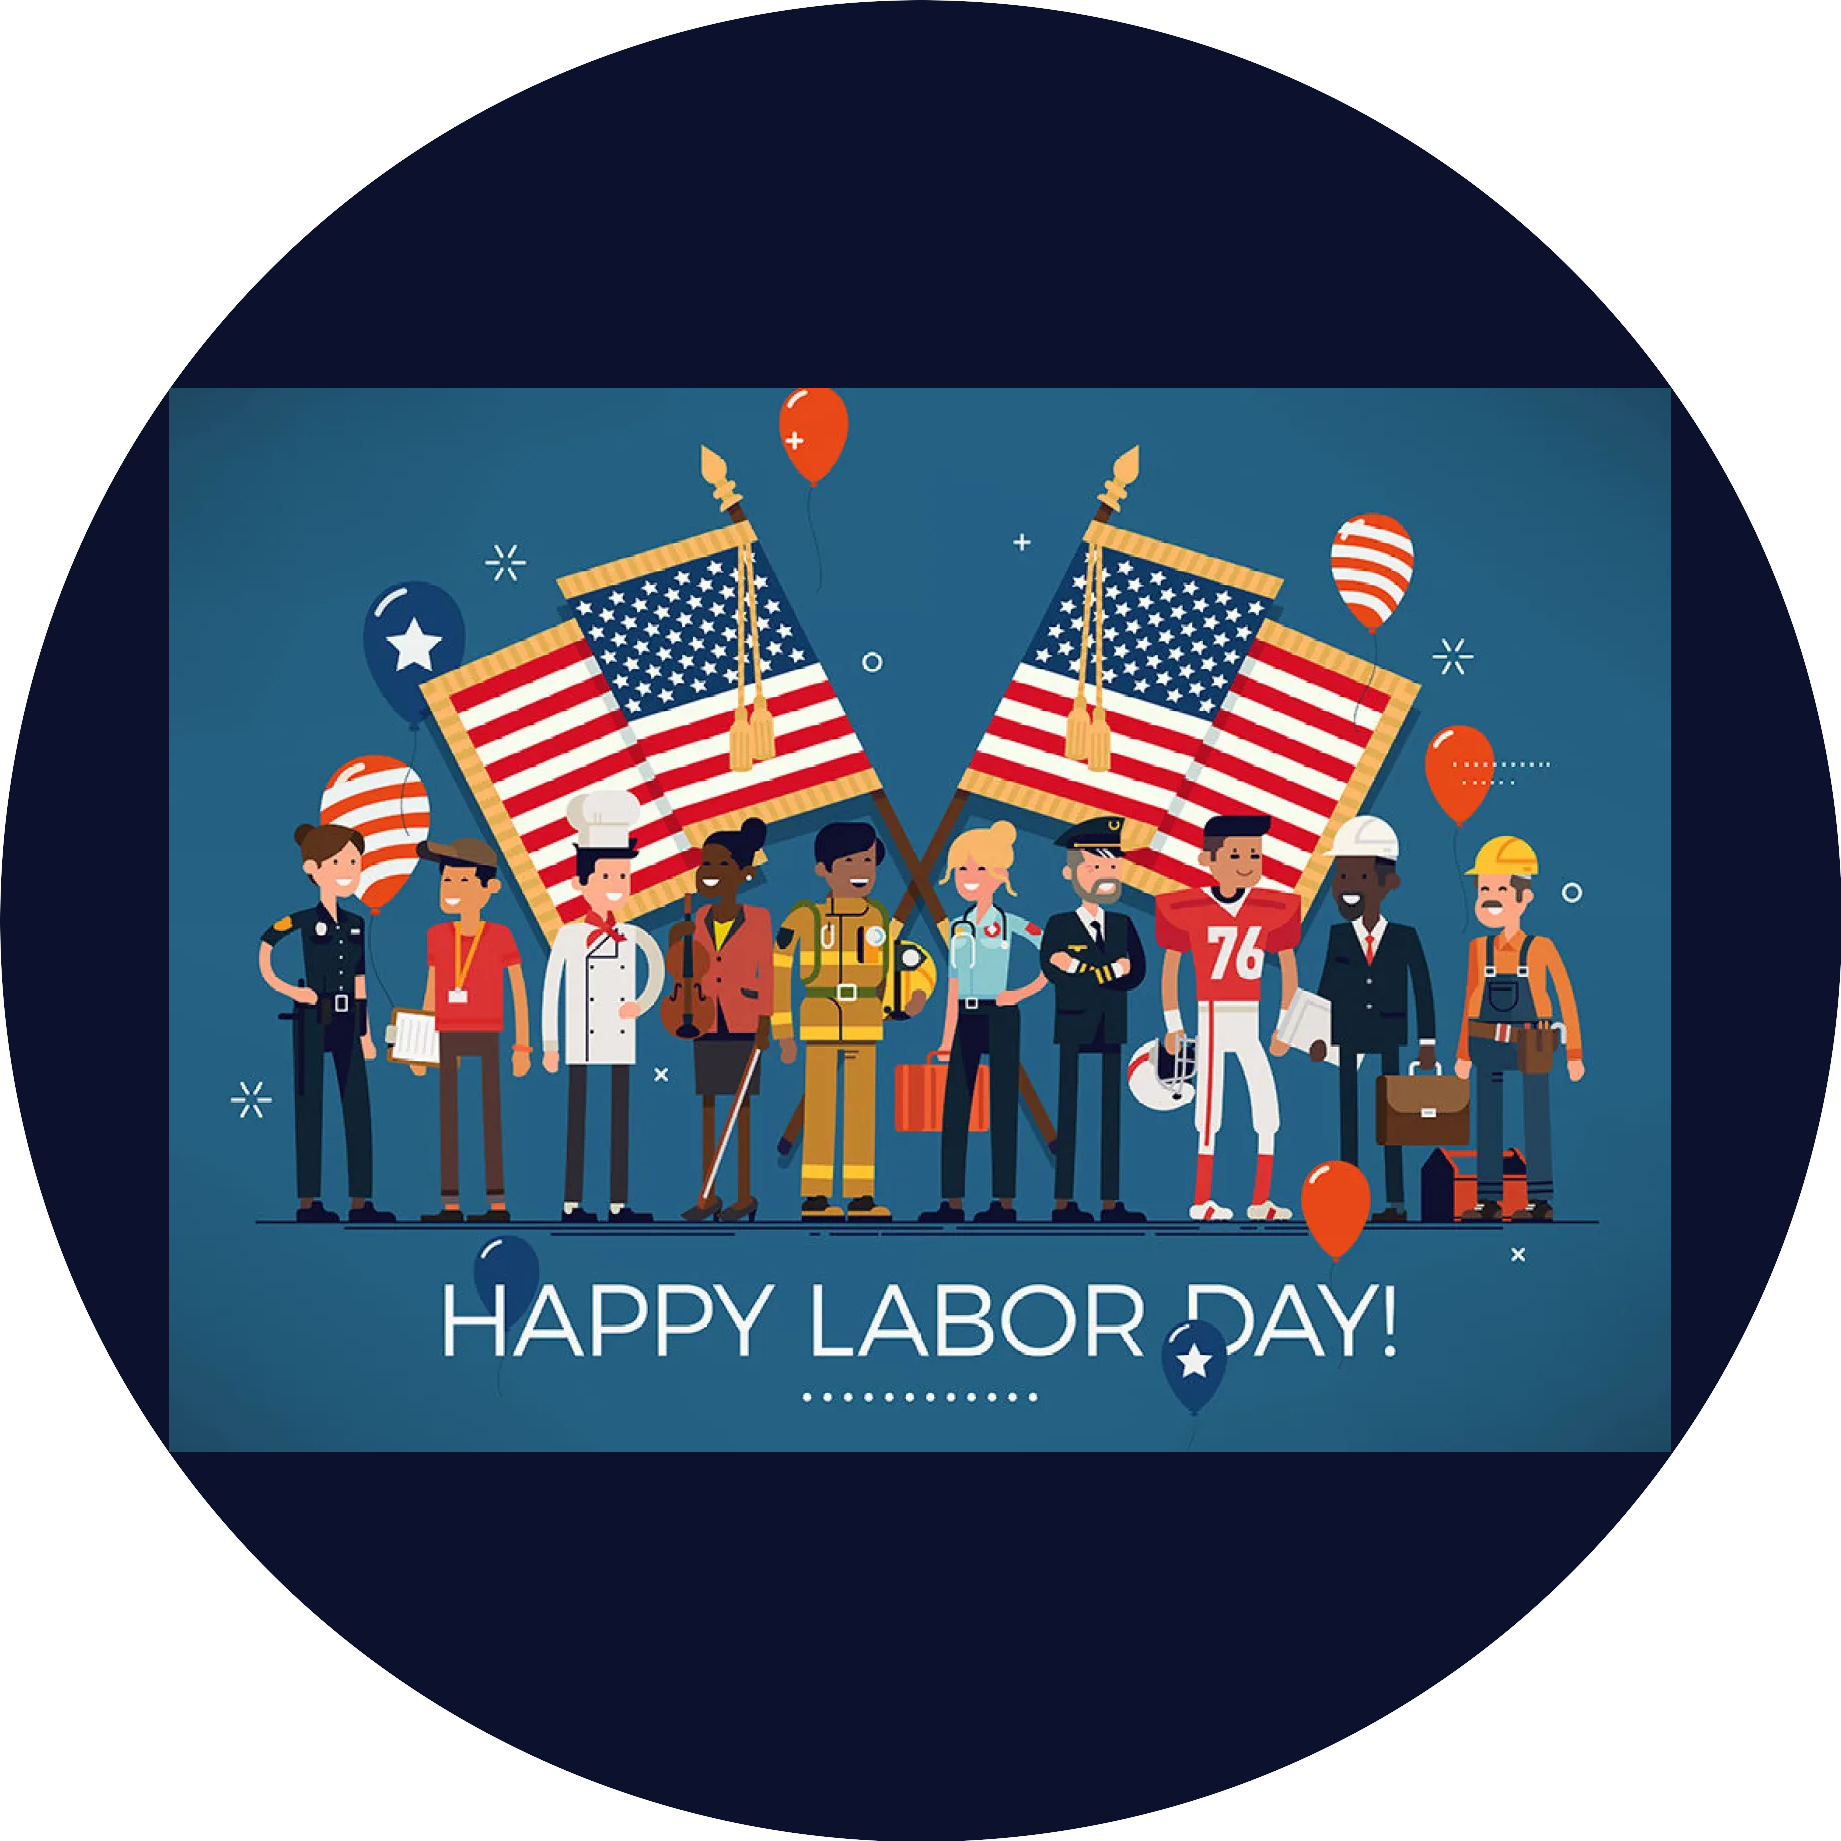 Happy Labor Day American Flags Assorted Workers Edible Cake Topper Image ABPID56470